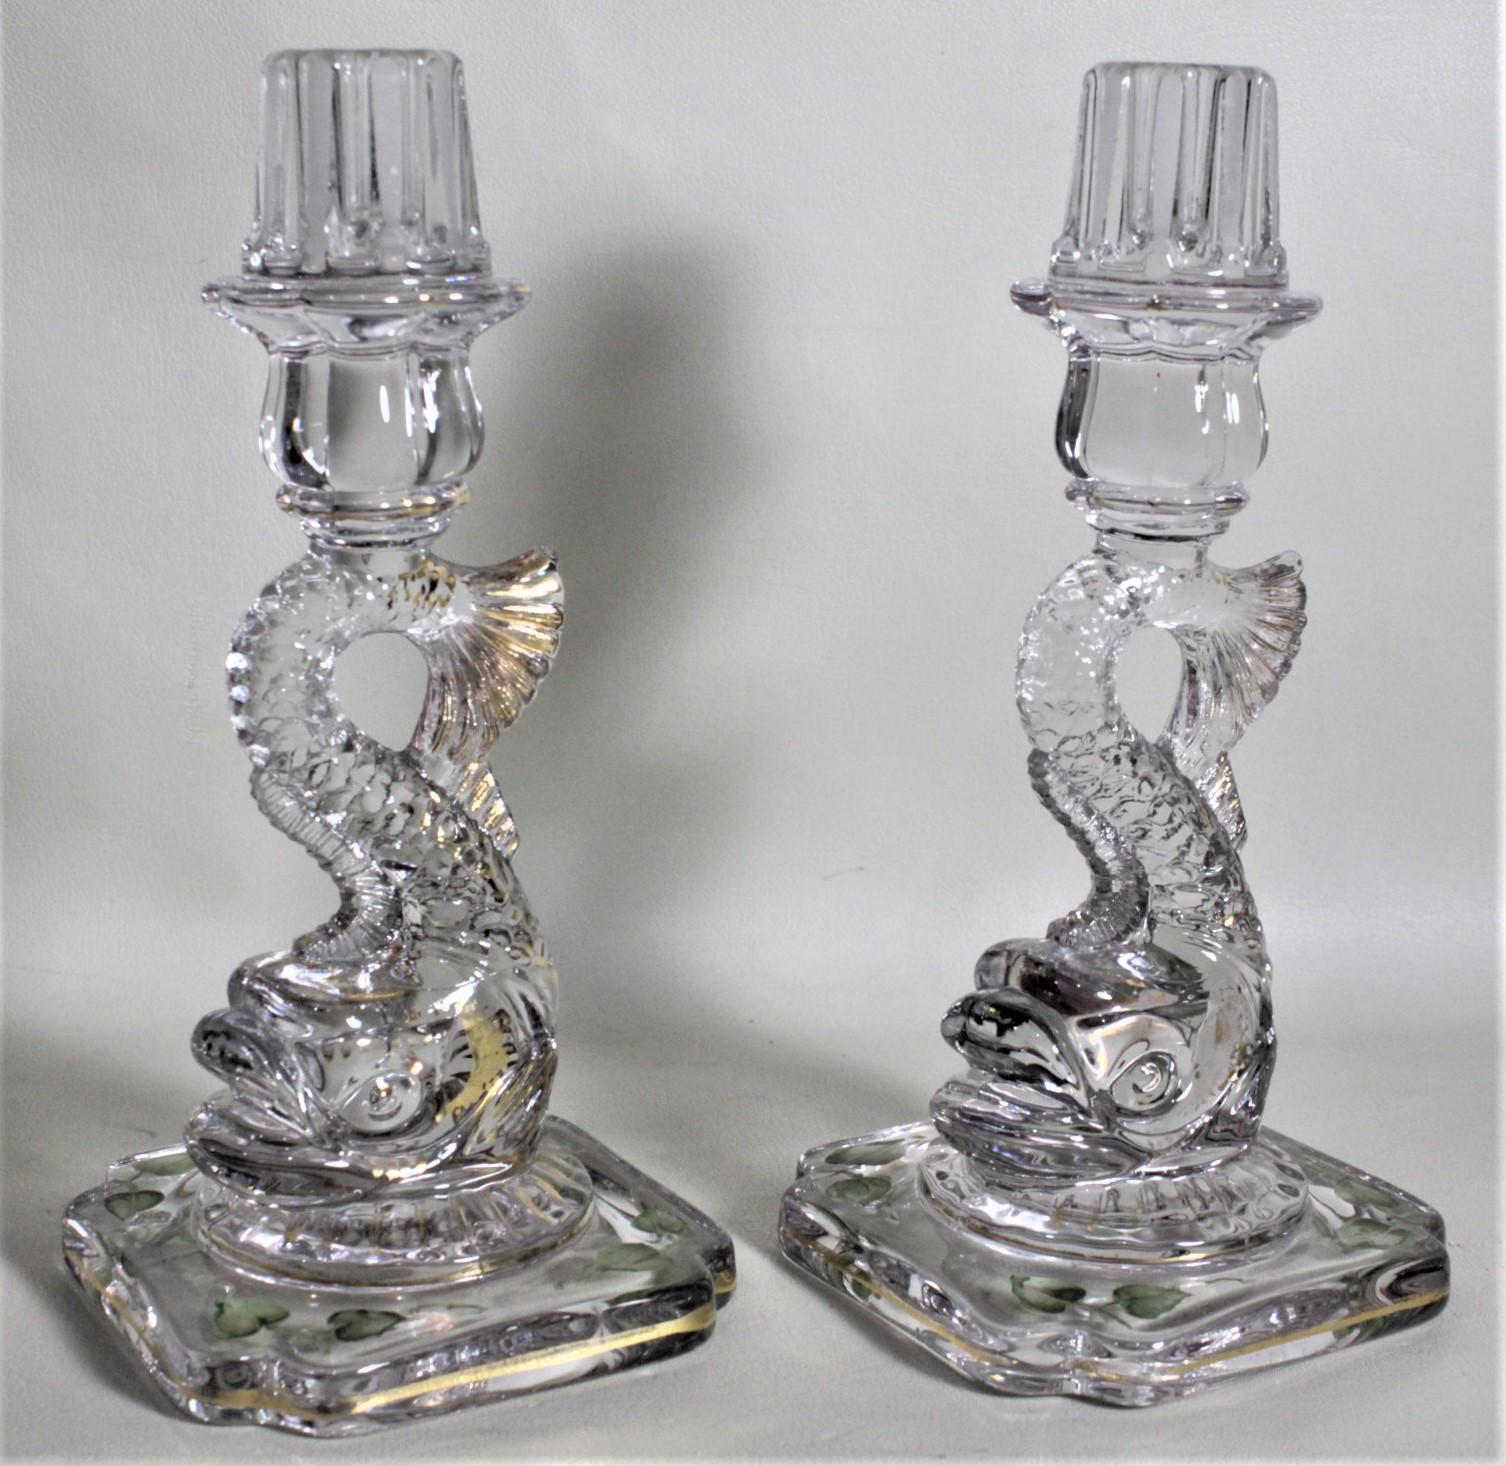 High Victorian Pair of Antique Glass Figural Dolphin Lustres or Candleholders with Enamelling For Sale